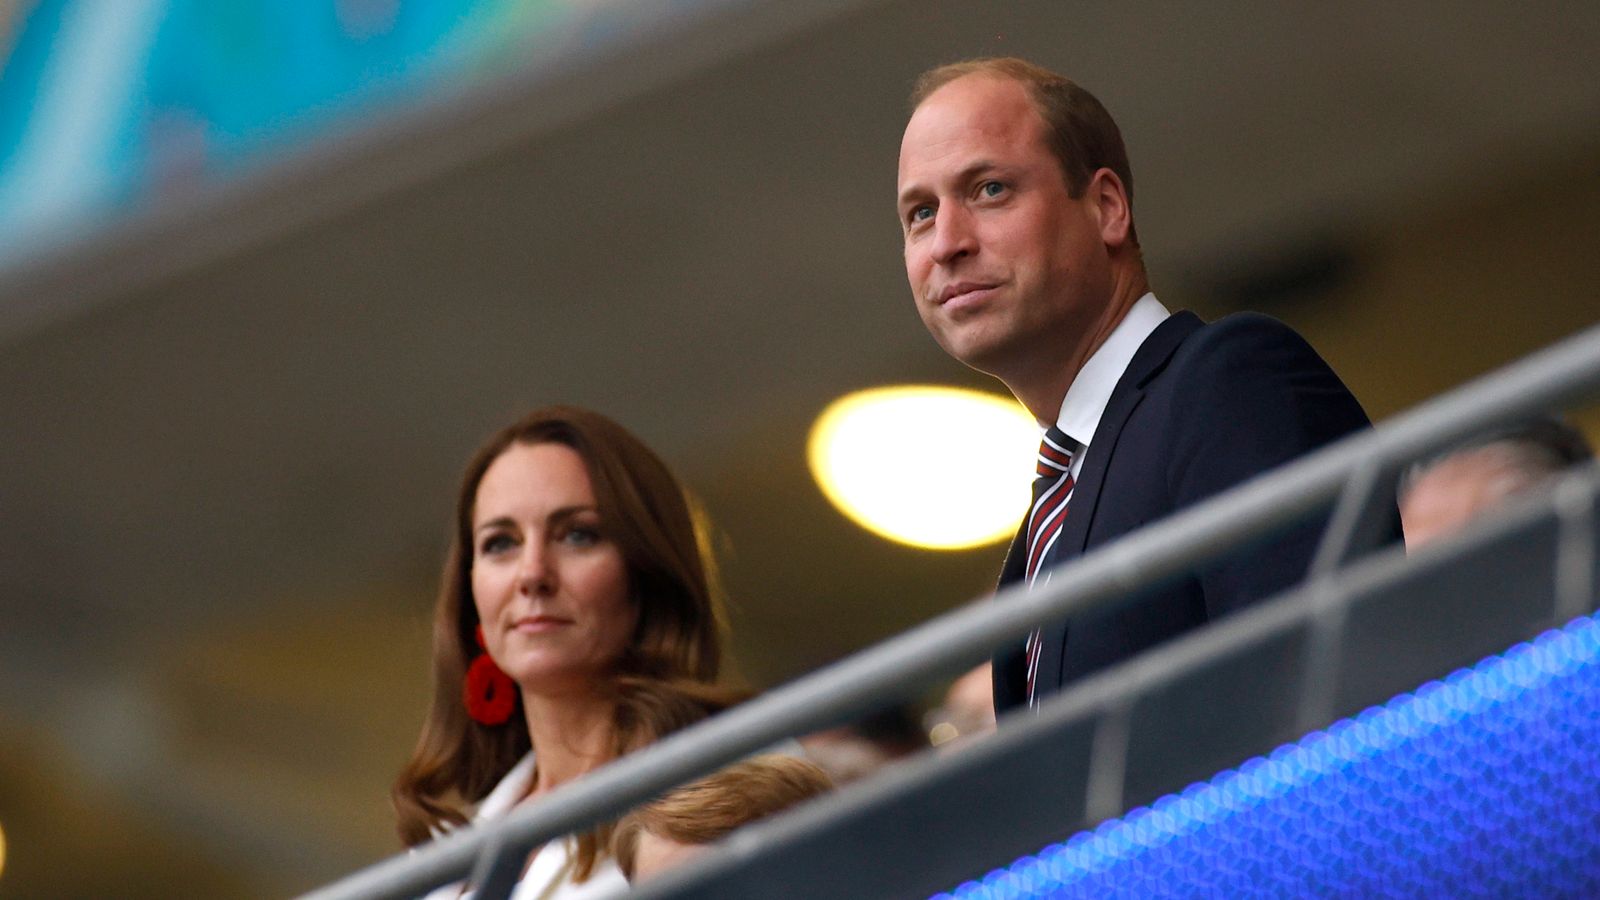 Women's World Cup final: Prince William says 'sorry we can't be there' but wishes Lionesses luck as they prepare to face Spain